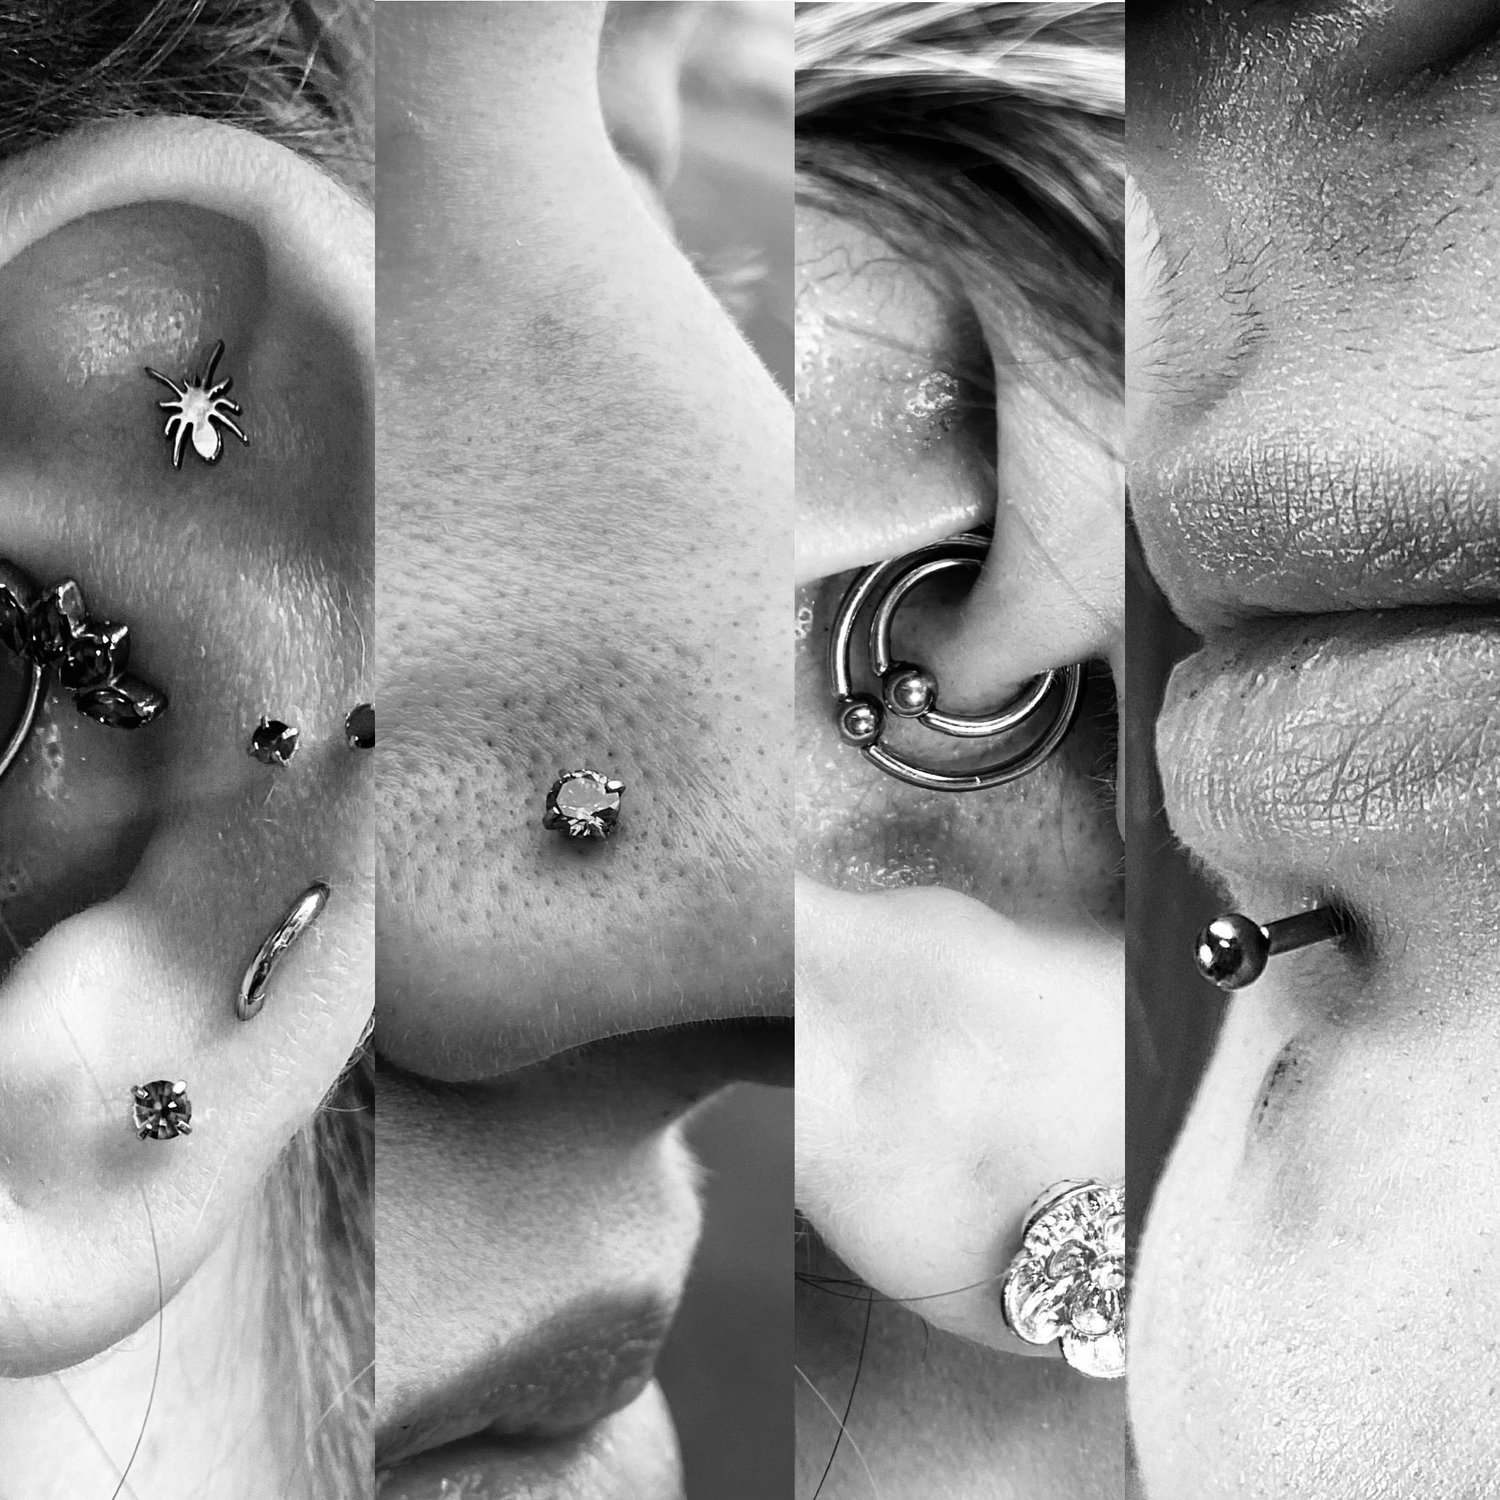 Piercing Studio for Ear and Nose Piercings